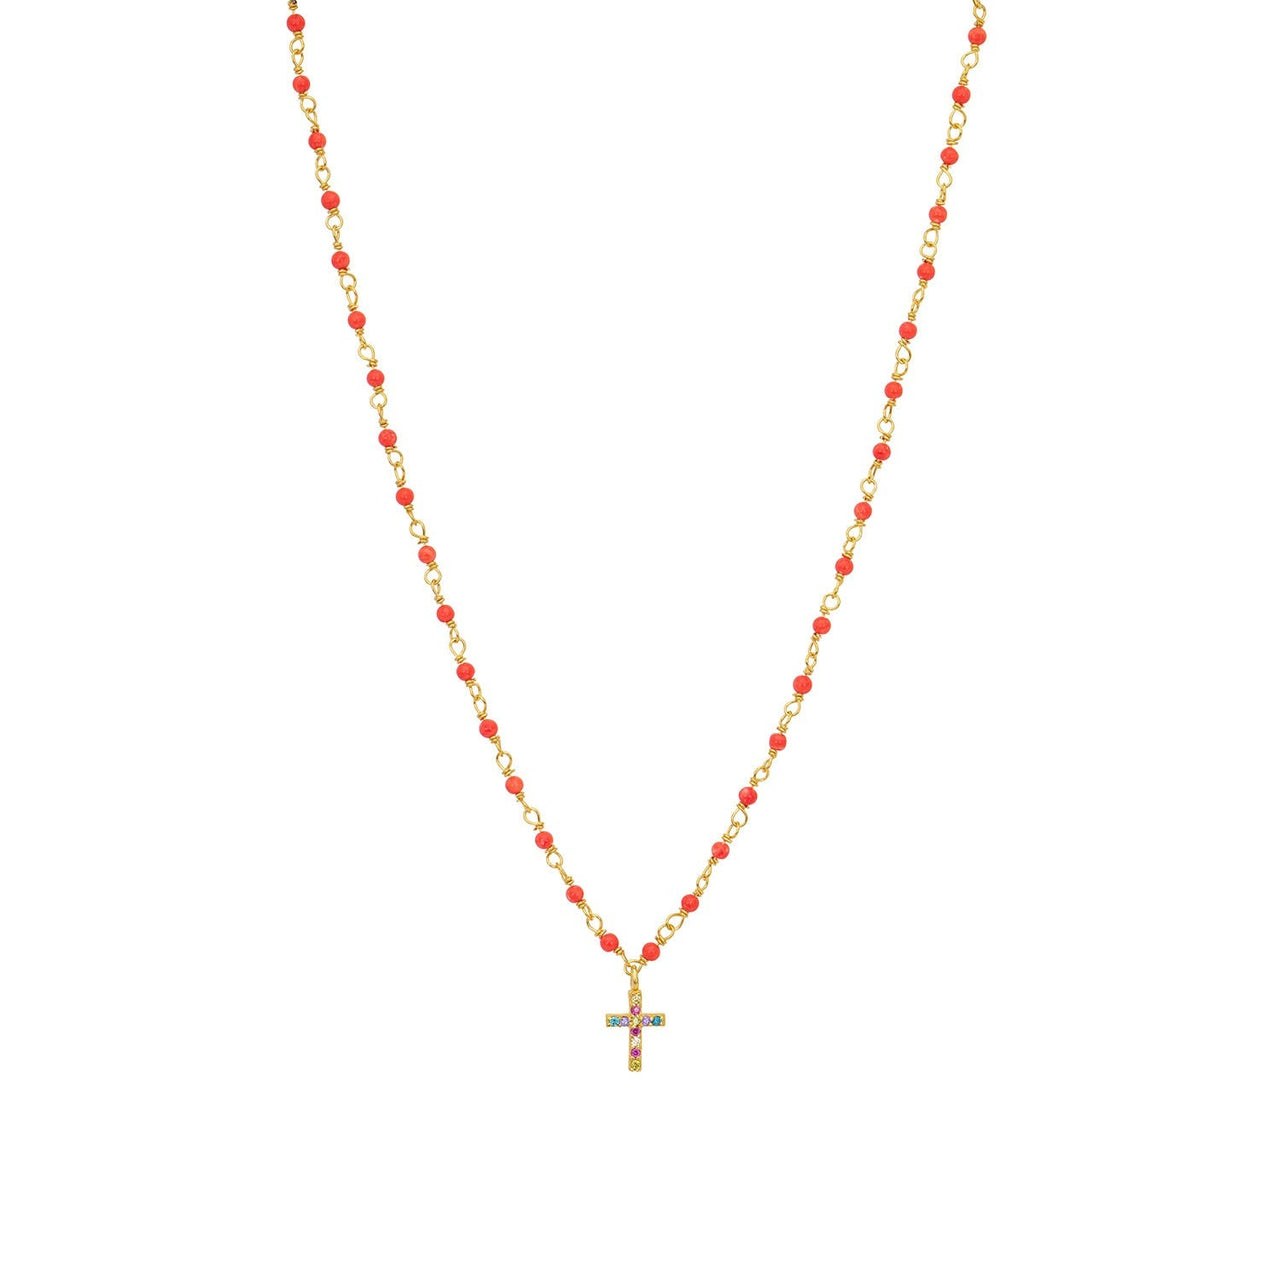 INDIA CORAL CROSS NECKLACE